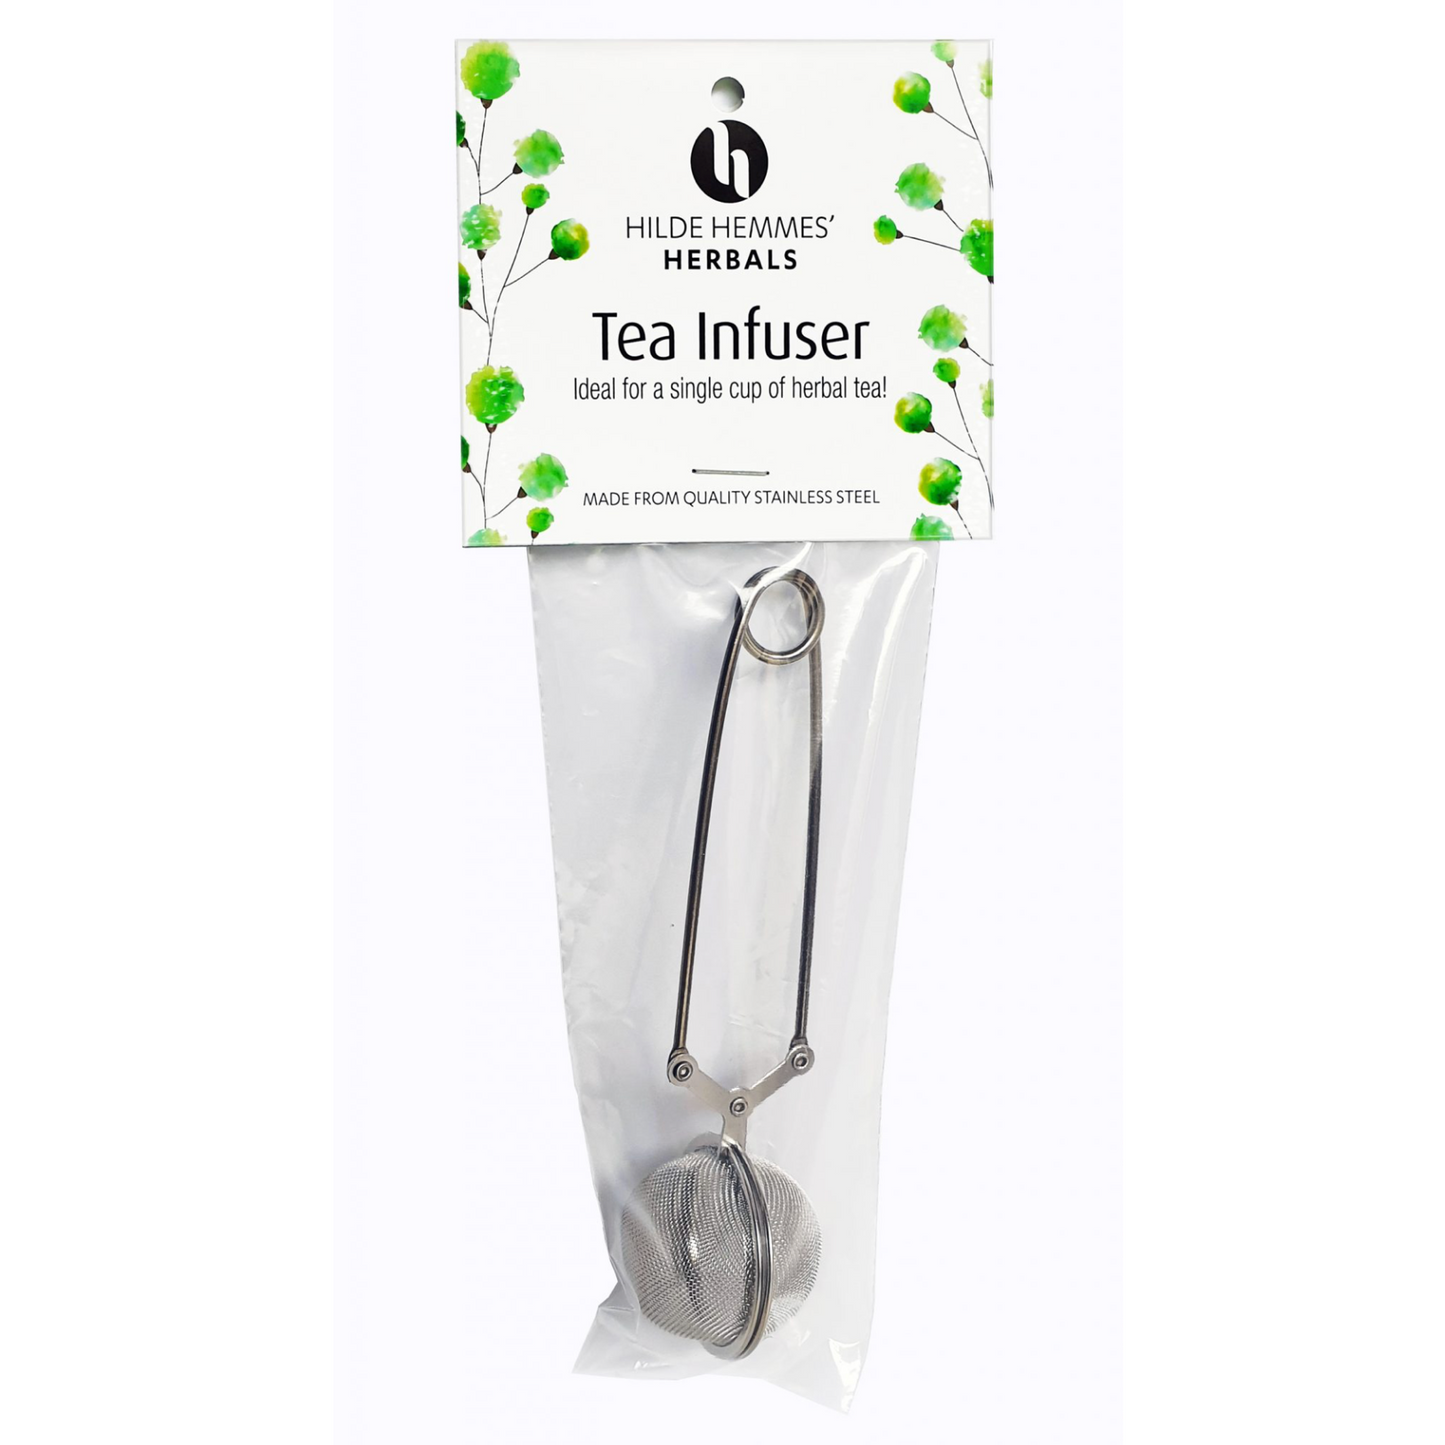 Hilde Hemmes Herbal's Tea Infuser, Made From Quality Stainless Steel